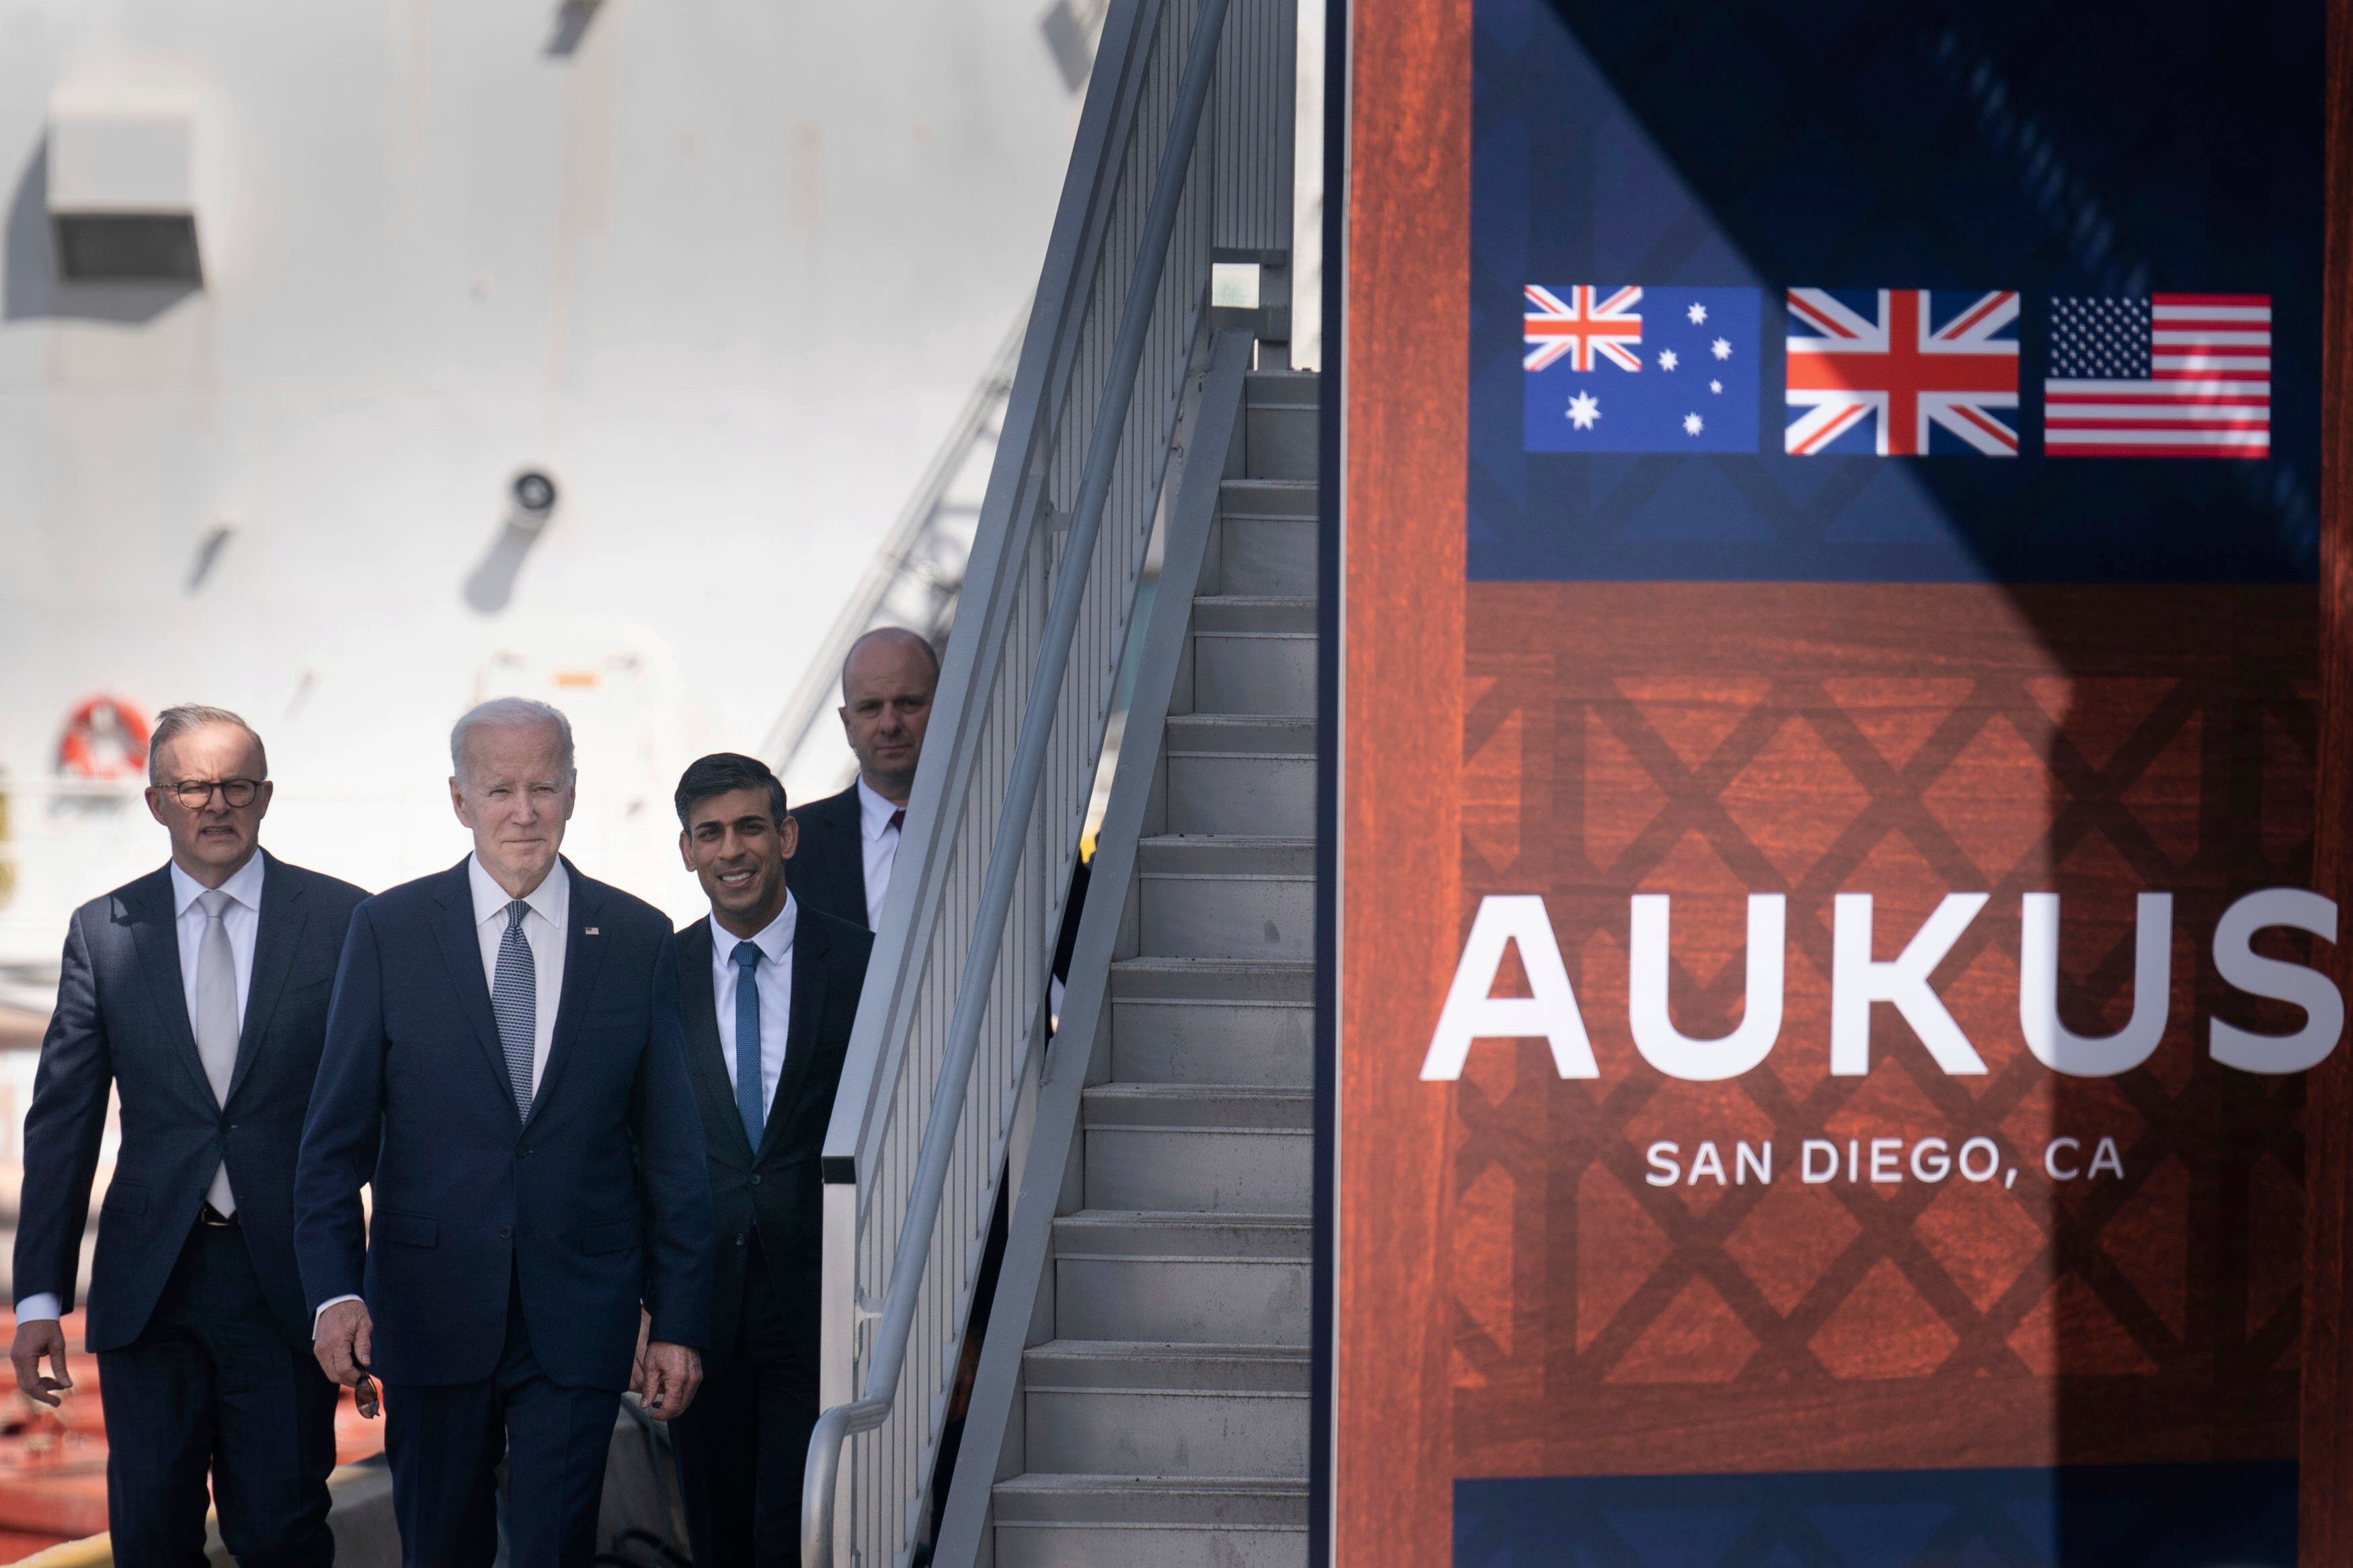 Australian Prime Minister Anthony Albanese (from left), US President Joe Biden and UK Prime Minister Rishi Sunak walk together at Point Loma naval base in San Diego, California during an Aukus meeting on March 13, 2023. Photo: AP